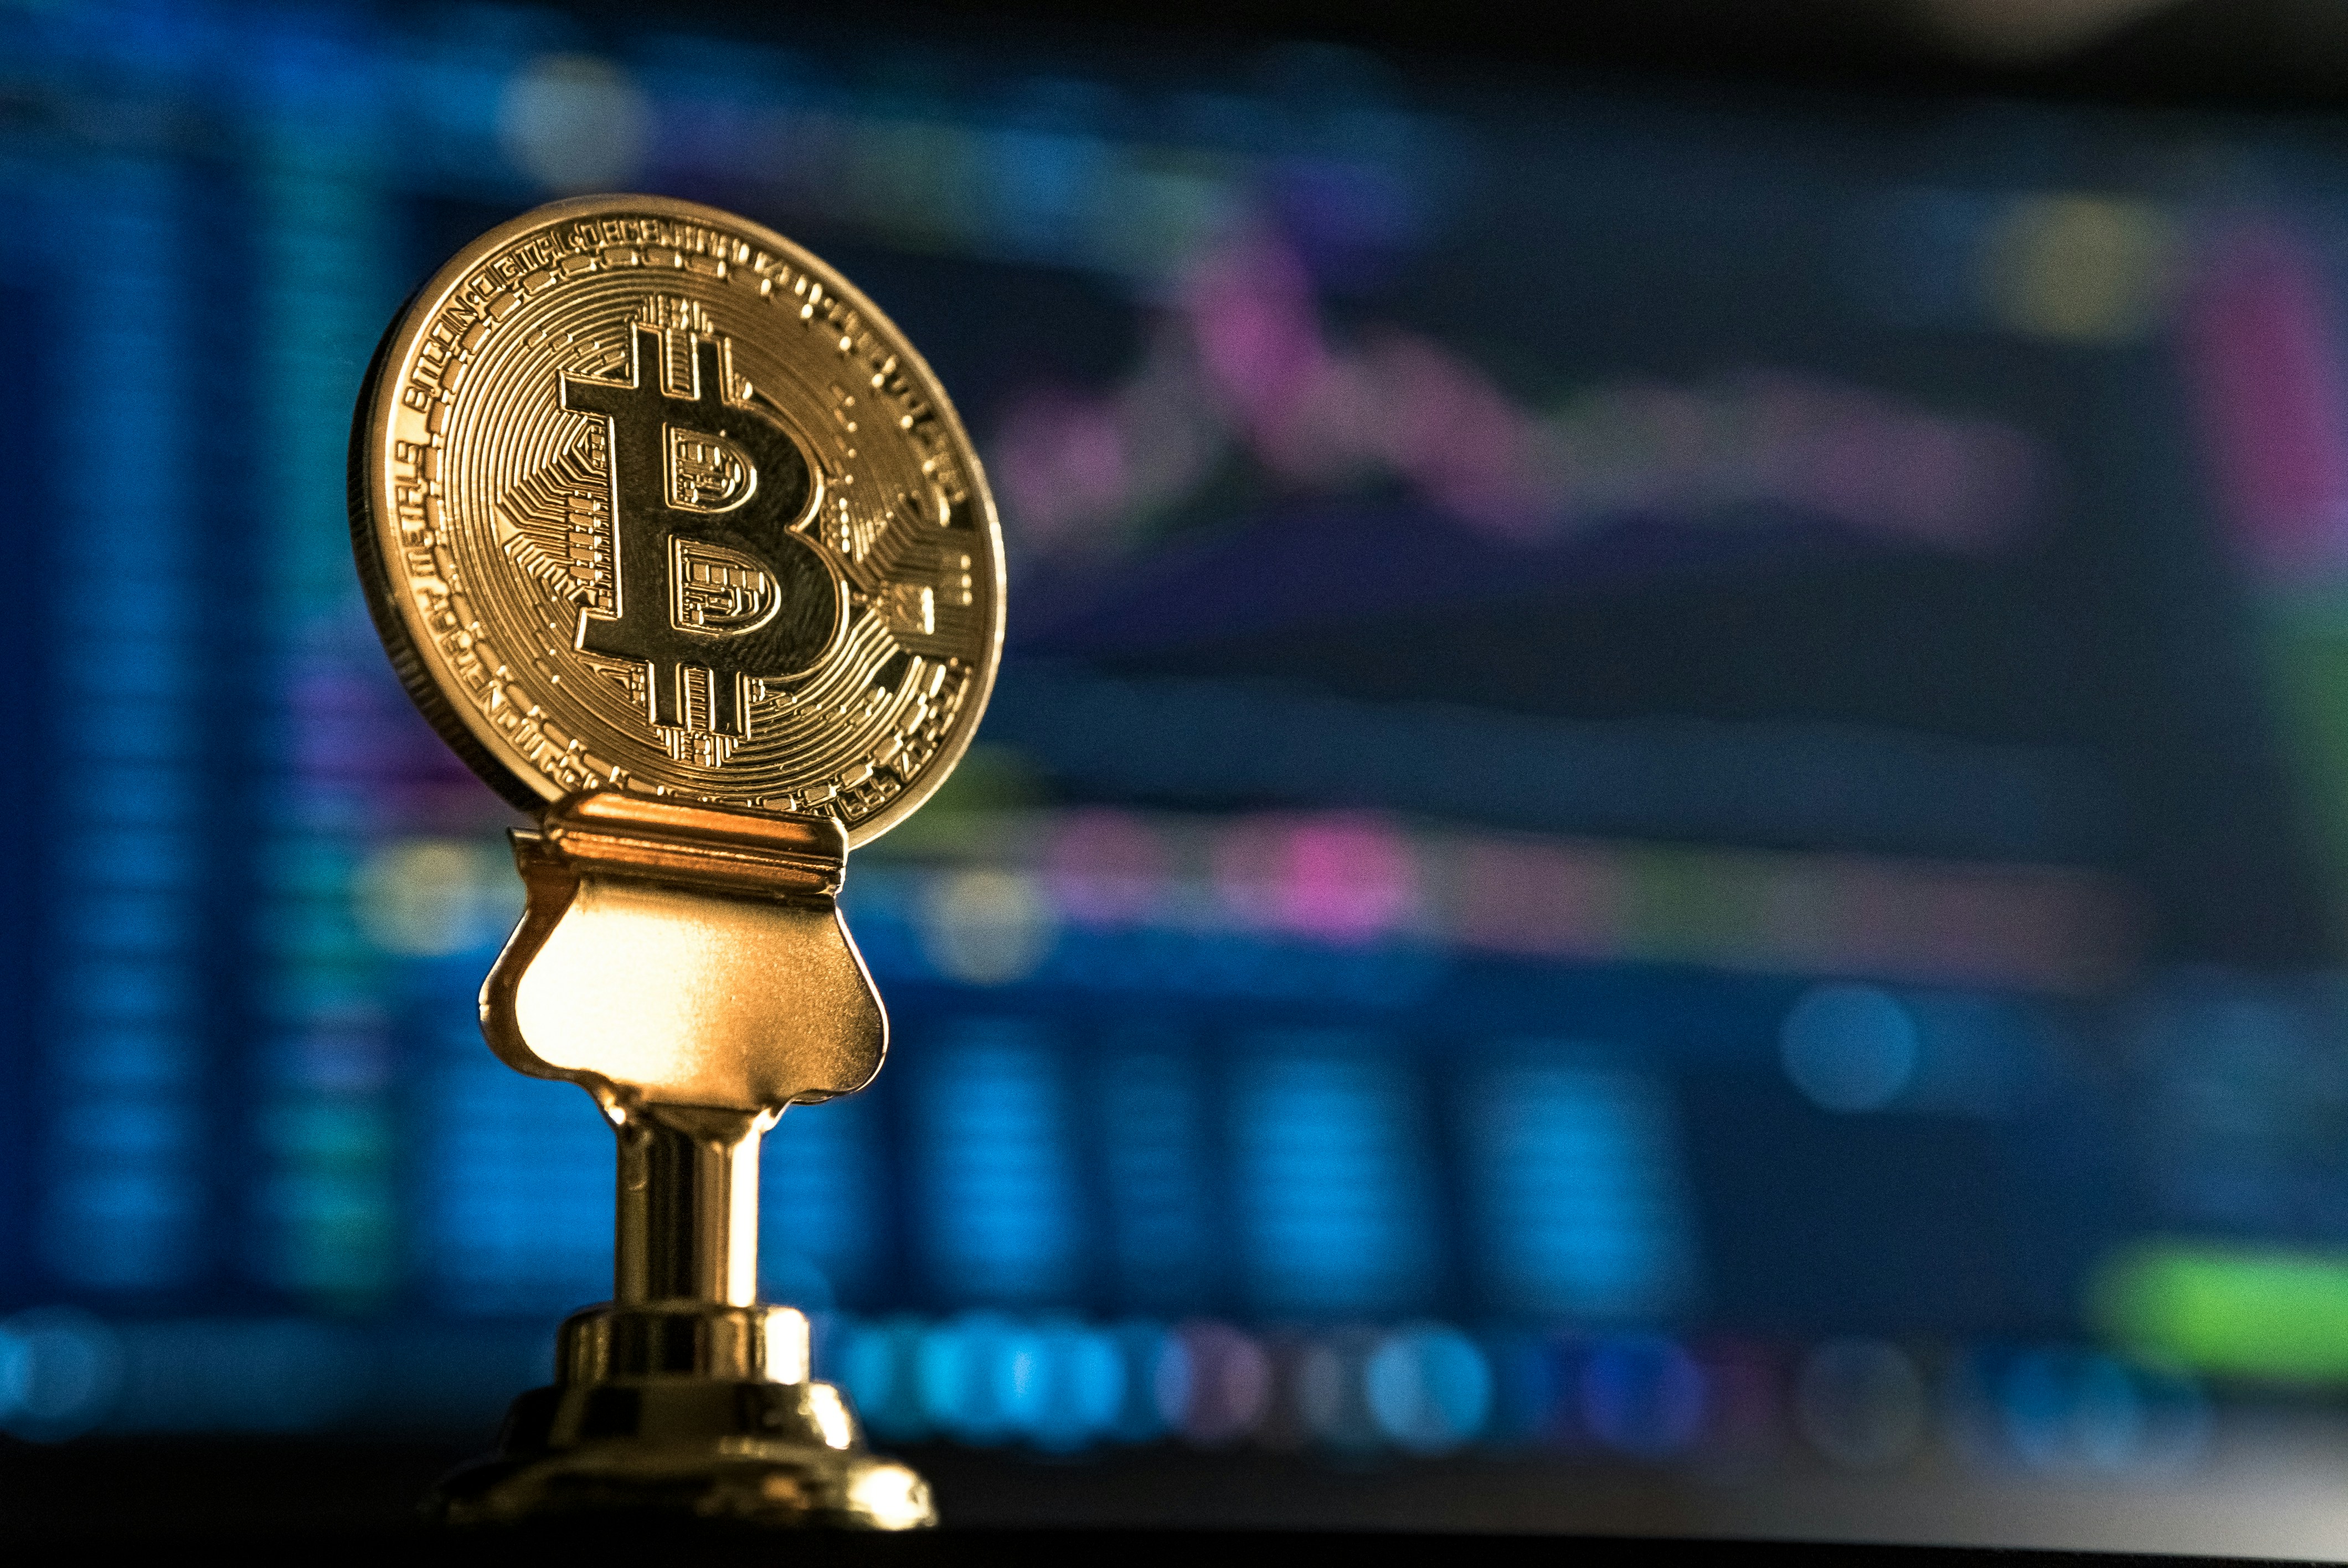 Bitcoin Relative Open Interest Lowest Since Feb, Analyst Says “Hard To Be Bearish”